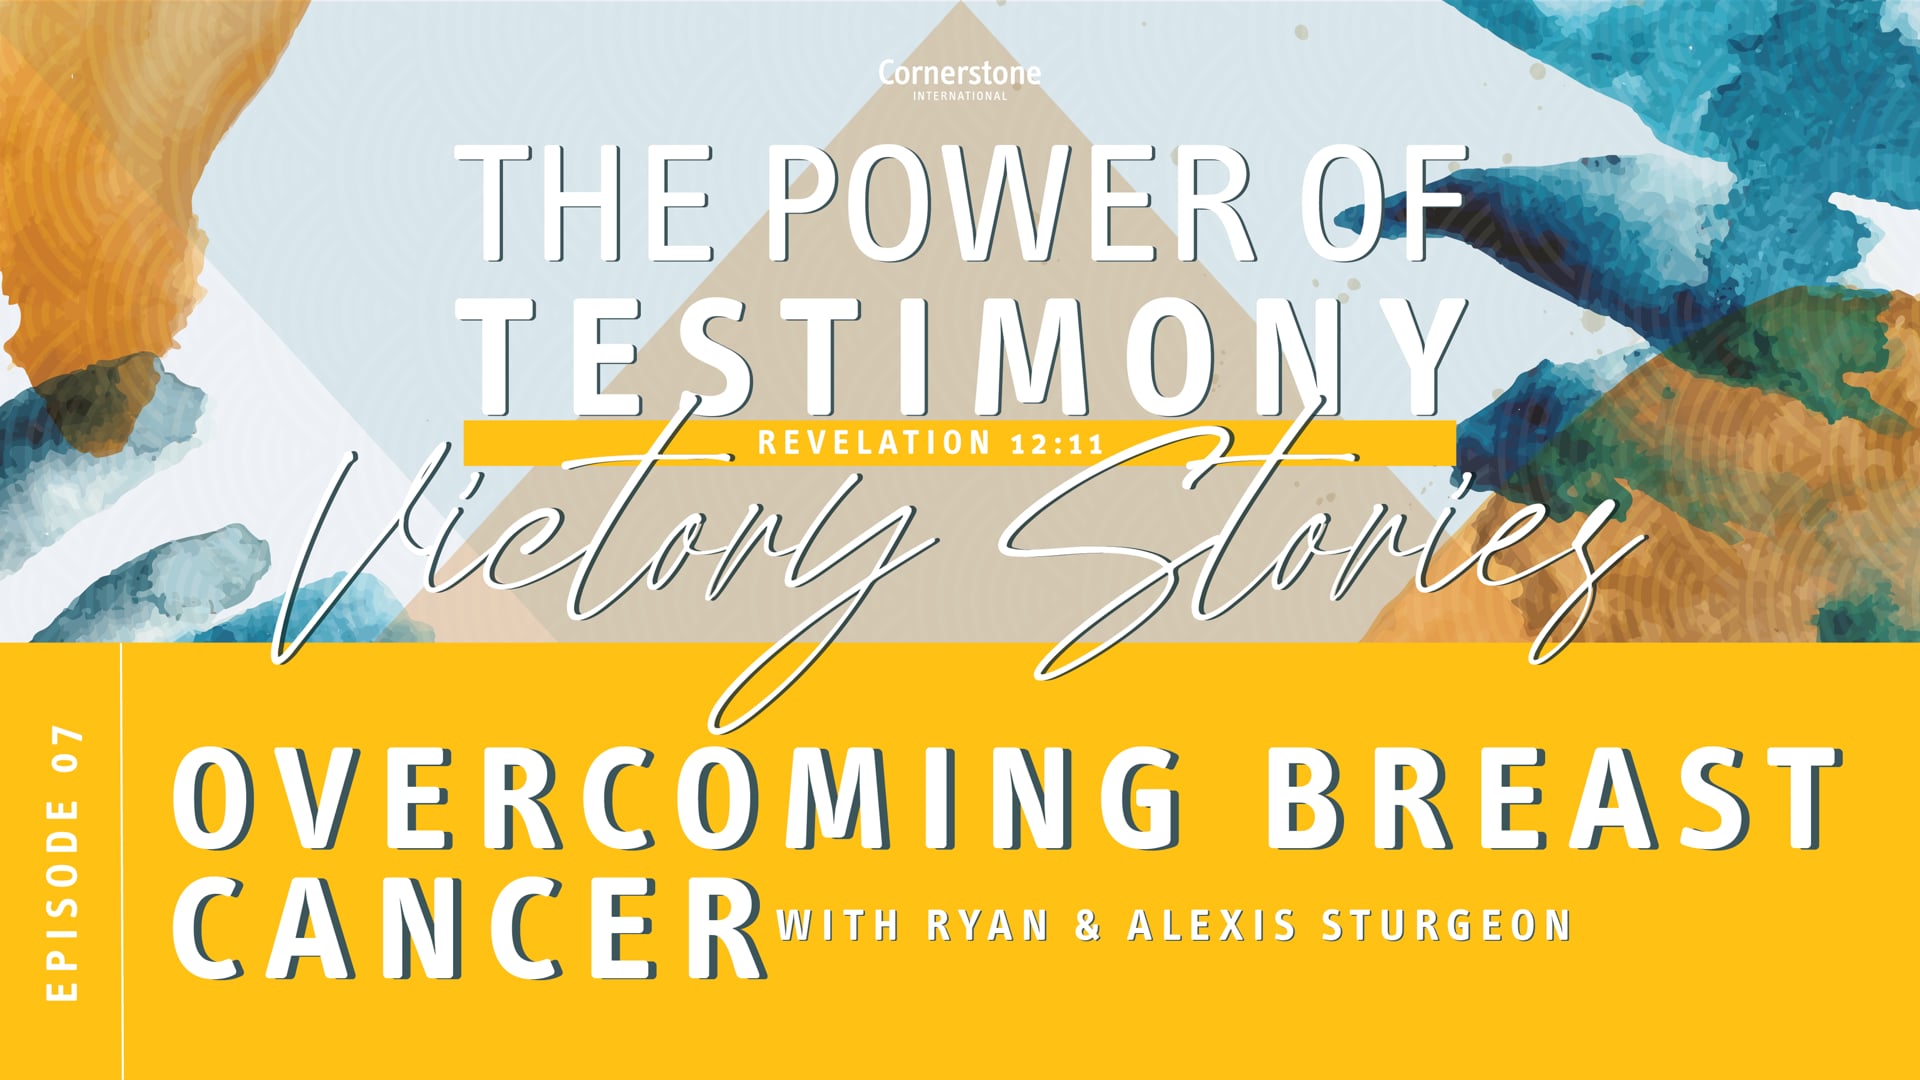 The Power Of Testimonies, Episode 07: Overcoming Breast Cancer